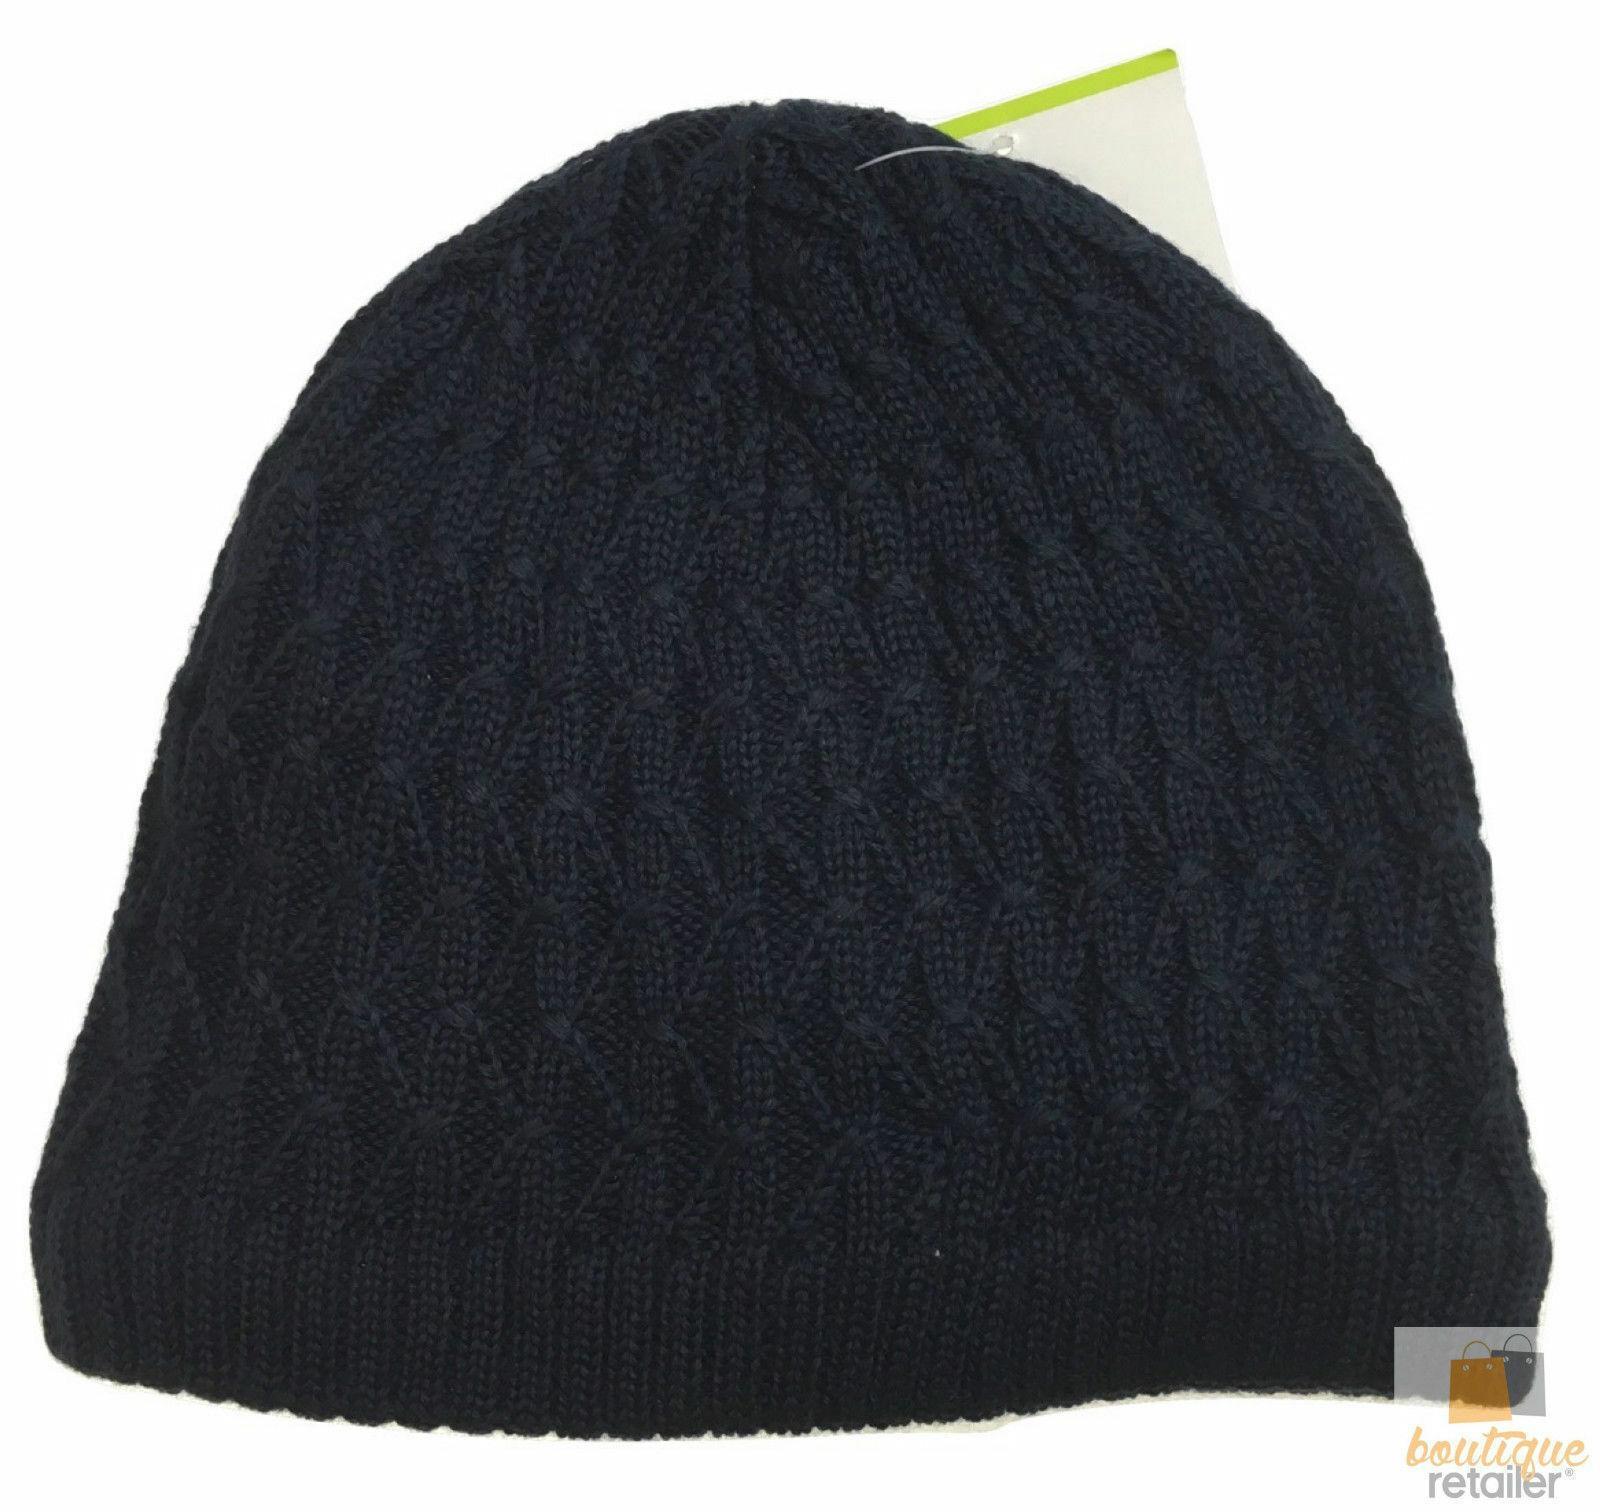 Wool Insulated Patterned Beanie Ski Thermal Insulation Hat Knit Wool - Navy